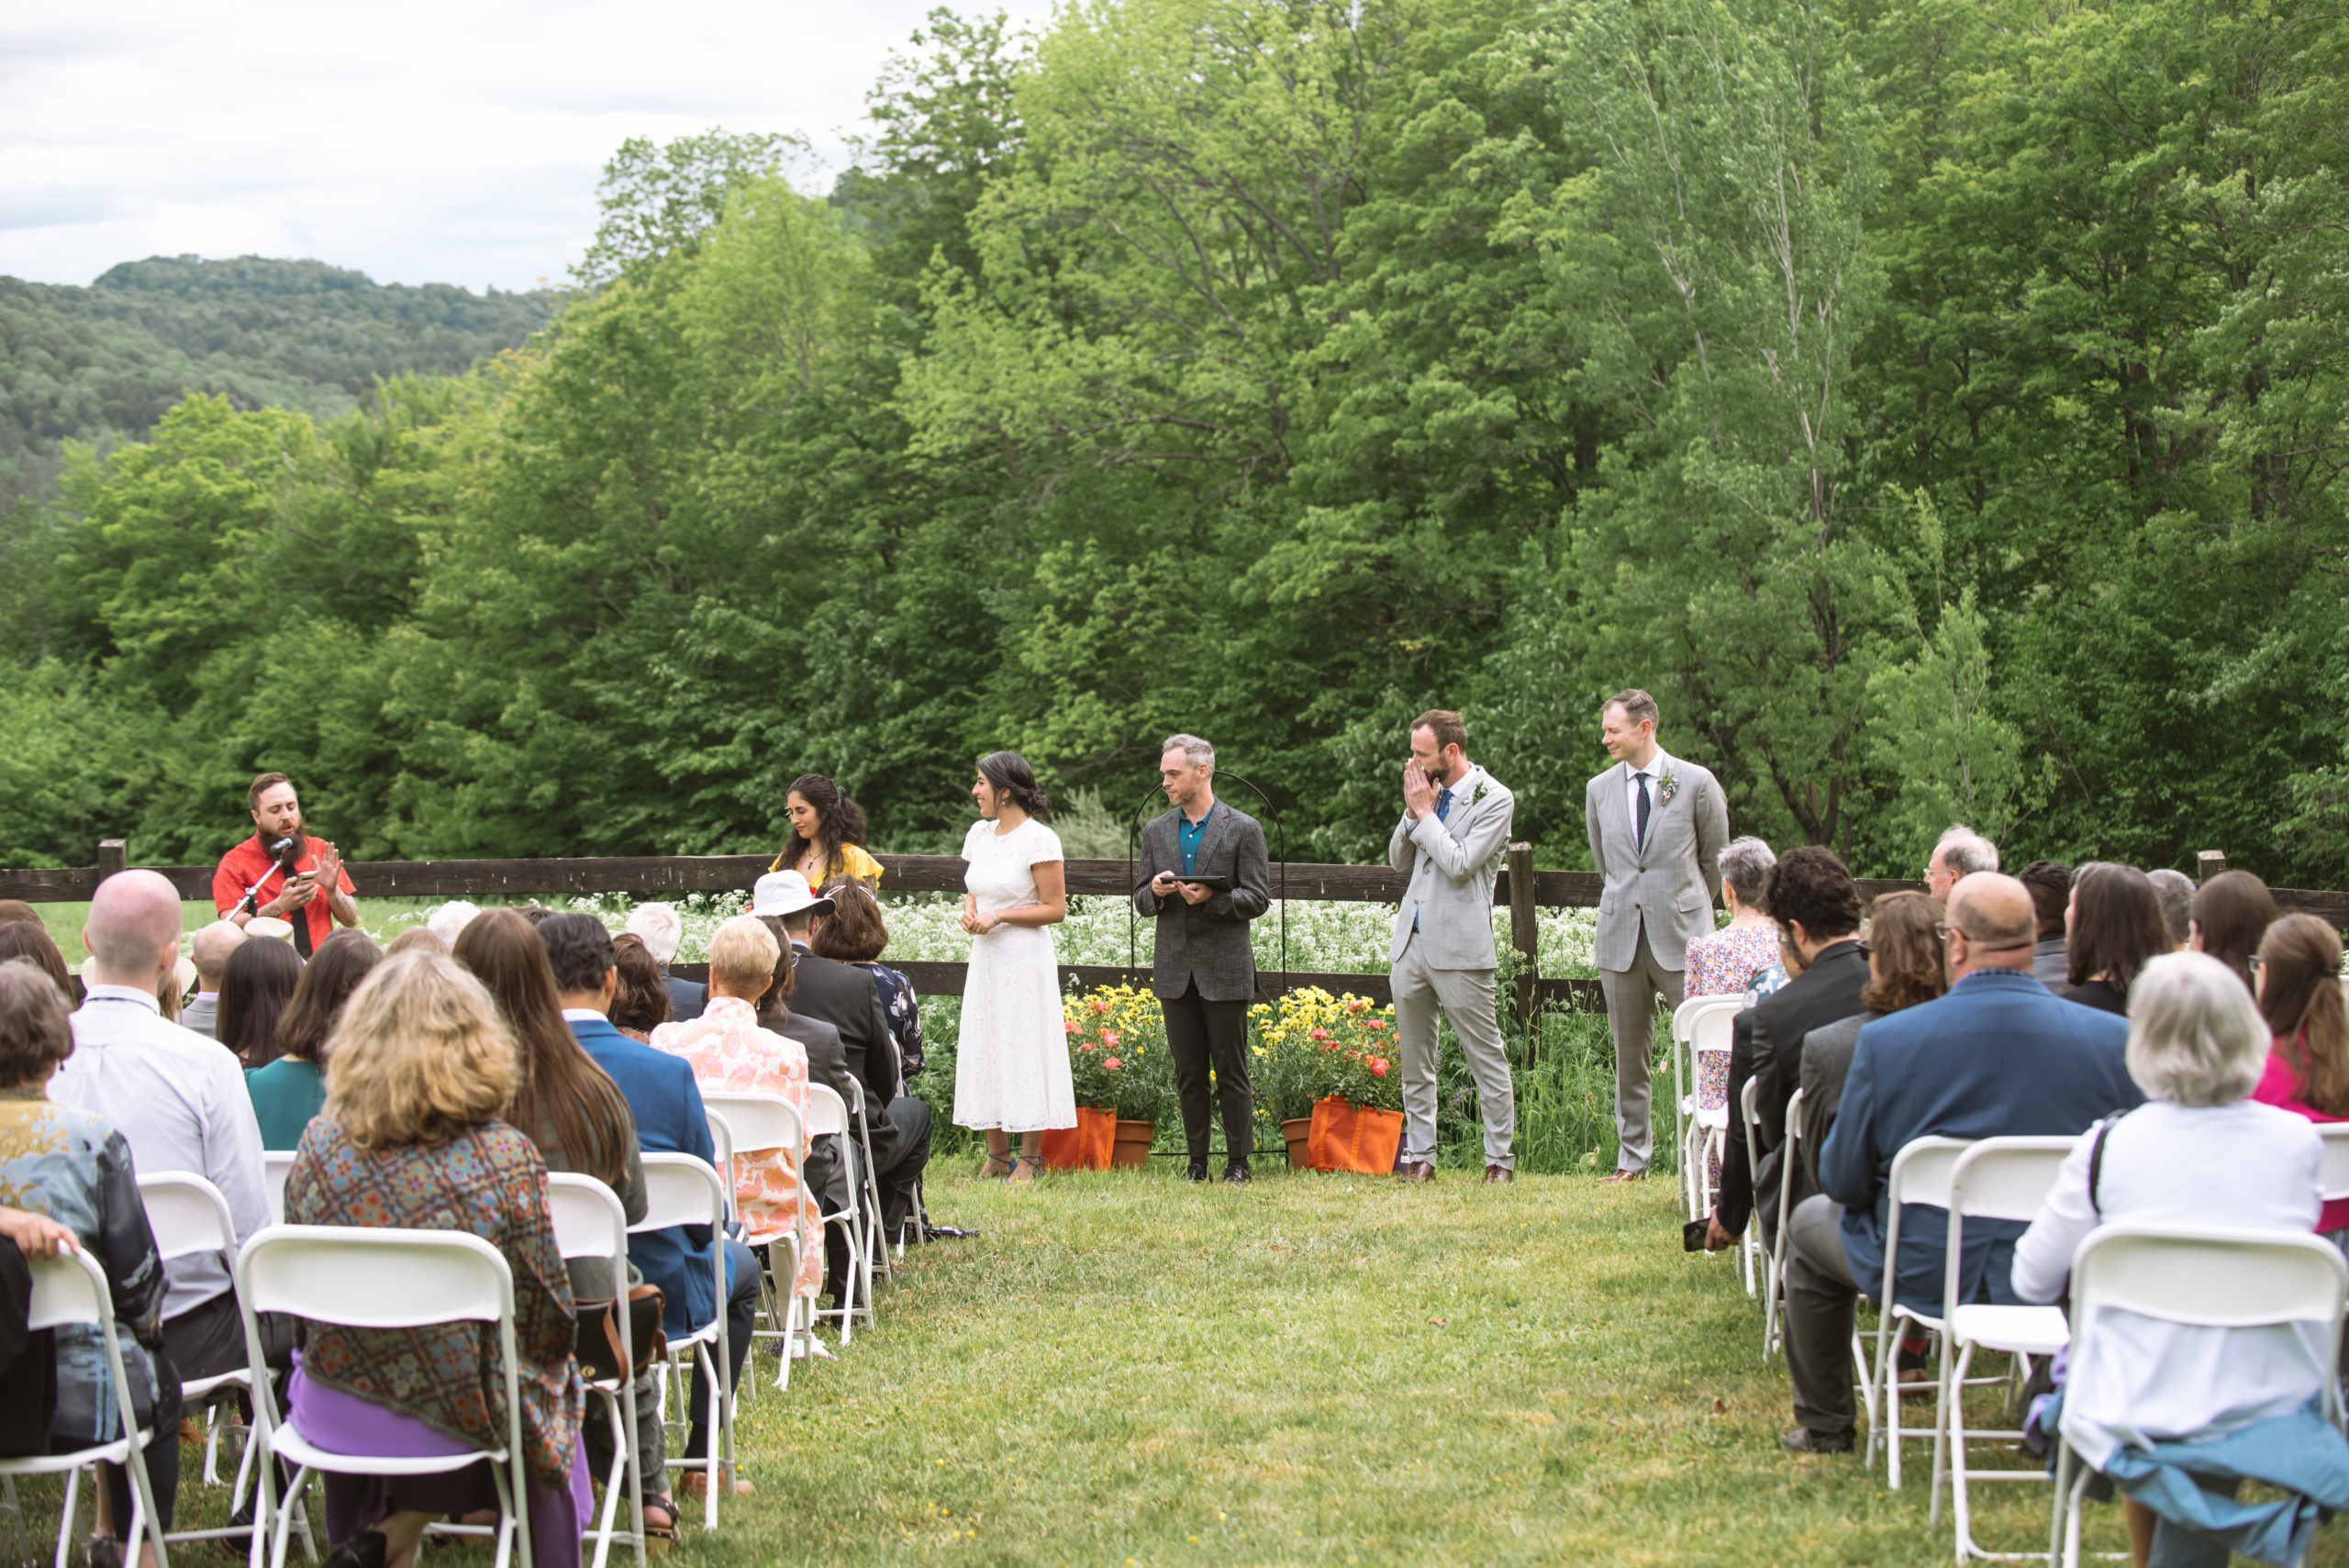 Ceremony featuring the couple and their wedding party (maid of honor and best man) at the alter with seated guests in the foreground. A friend of the couple is reciting a spoken-word poem at the microphone. Everyone is turned to look at him. The groom has his hands in front of his mouth in a moved/emotional manner. They are standing in front of a dark wooden fence with lots of white wildflowers in the field. There are trees and mountains in the background.